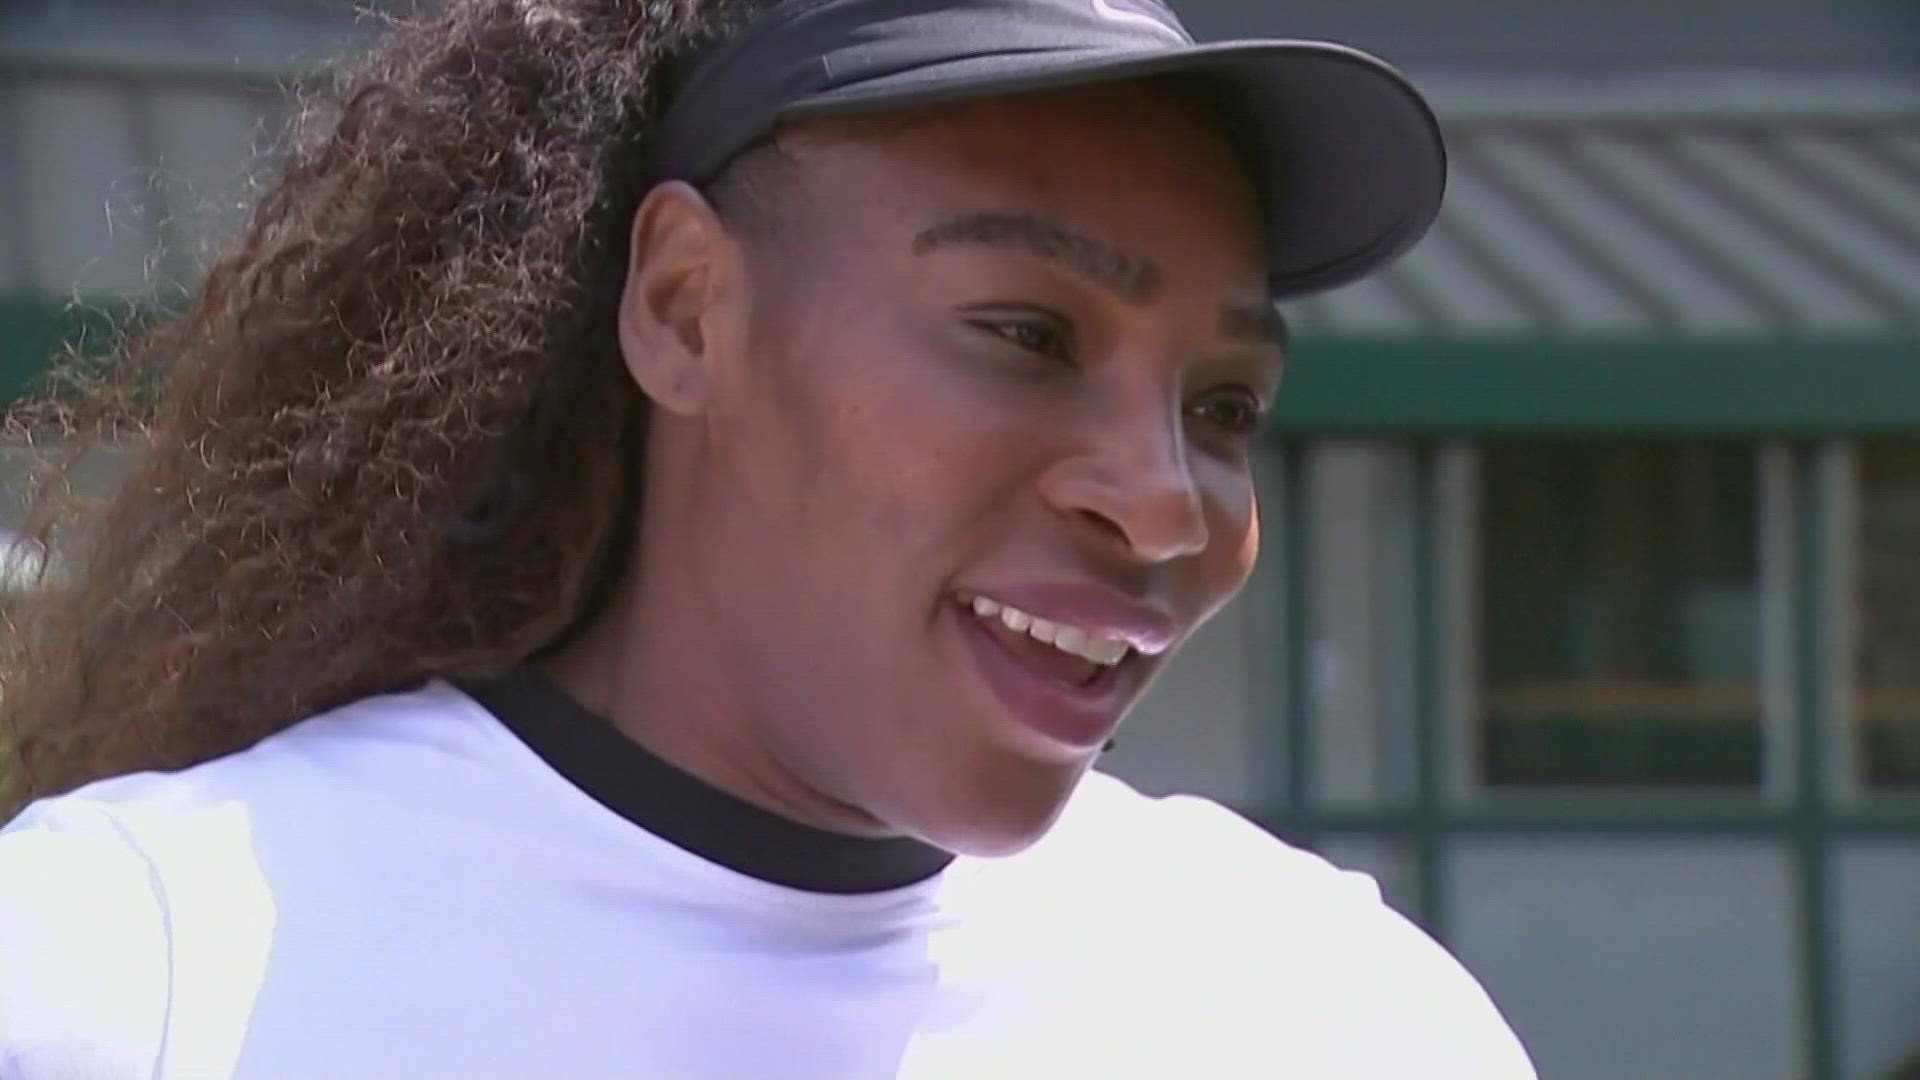 The 23-time Grand Slam winner says she wants to focus on growing her family and her business.